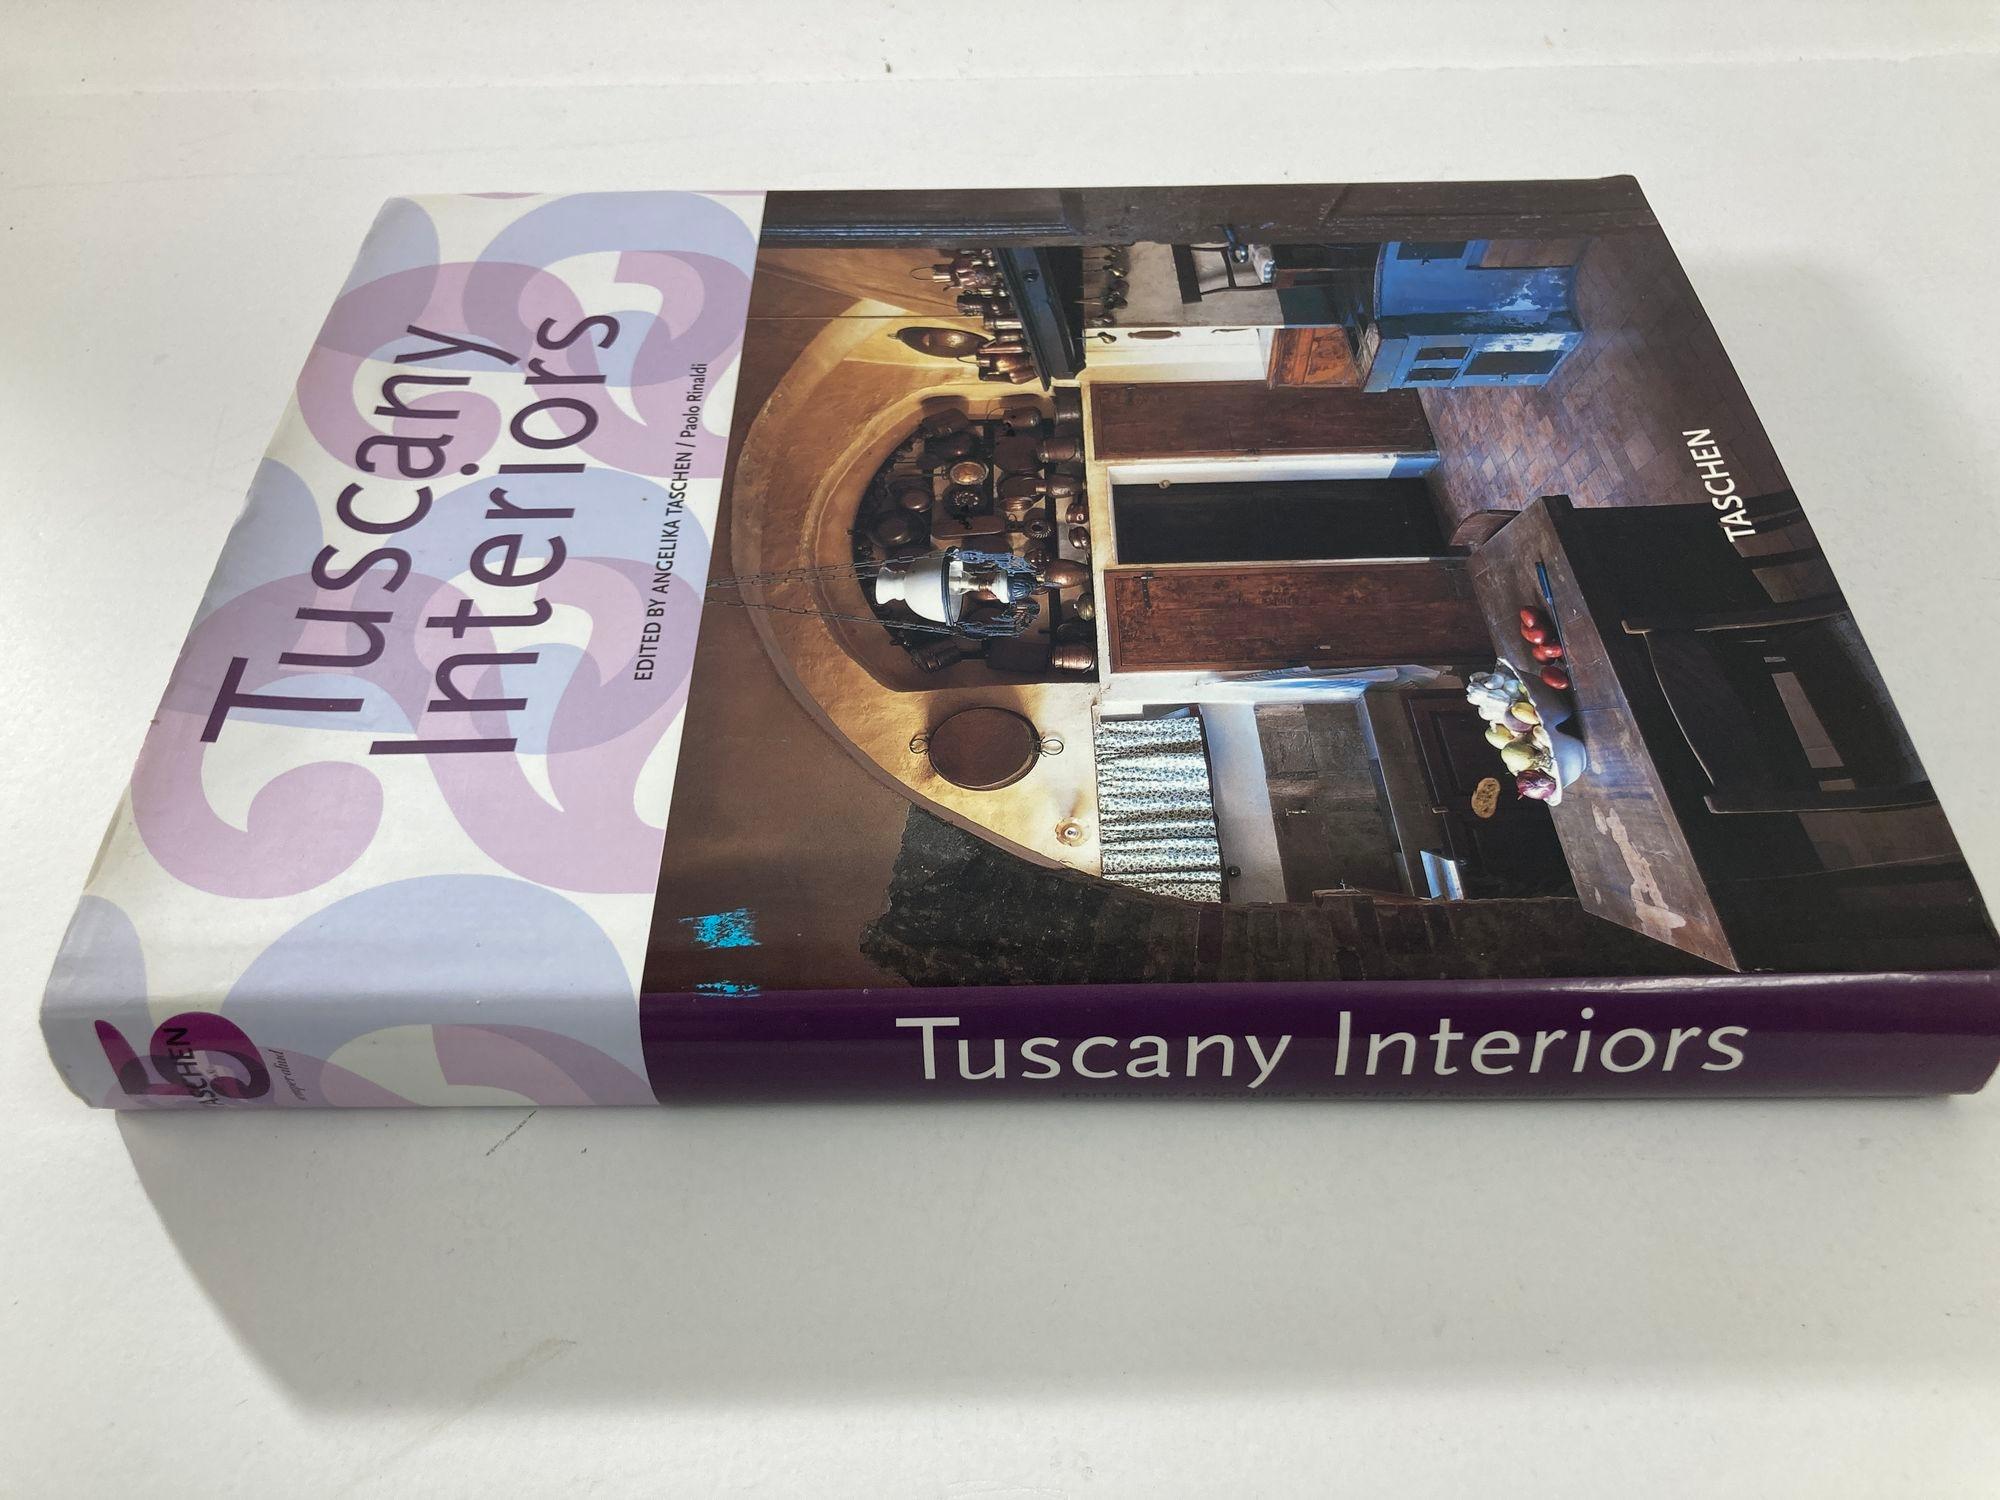 Tuscany Interiors large hardcover coffee table book By Paolo Rinaldi and Taschen.
Nestling in the gentle hills and brushed with the hazy sfumato of the air, the homes of Tuscany have long been the objects of lust and legend. This book affords a